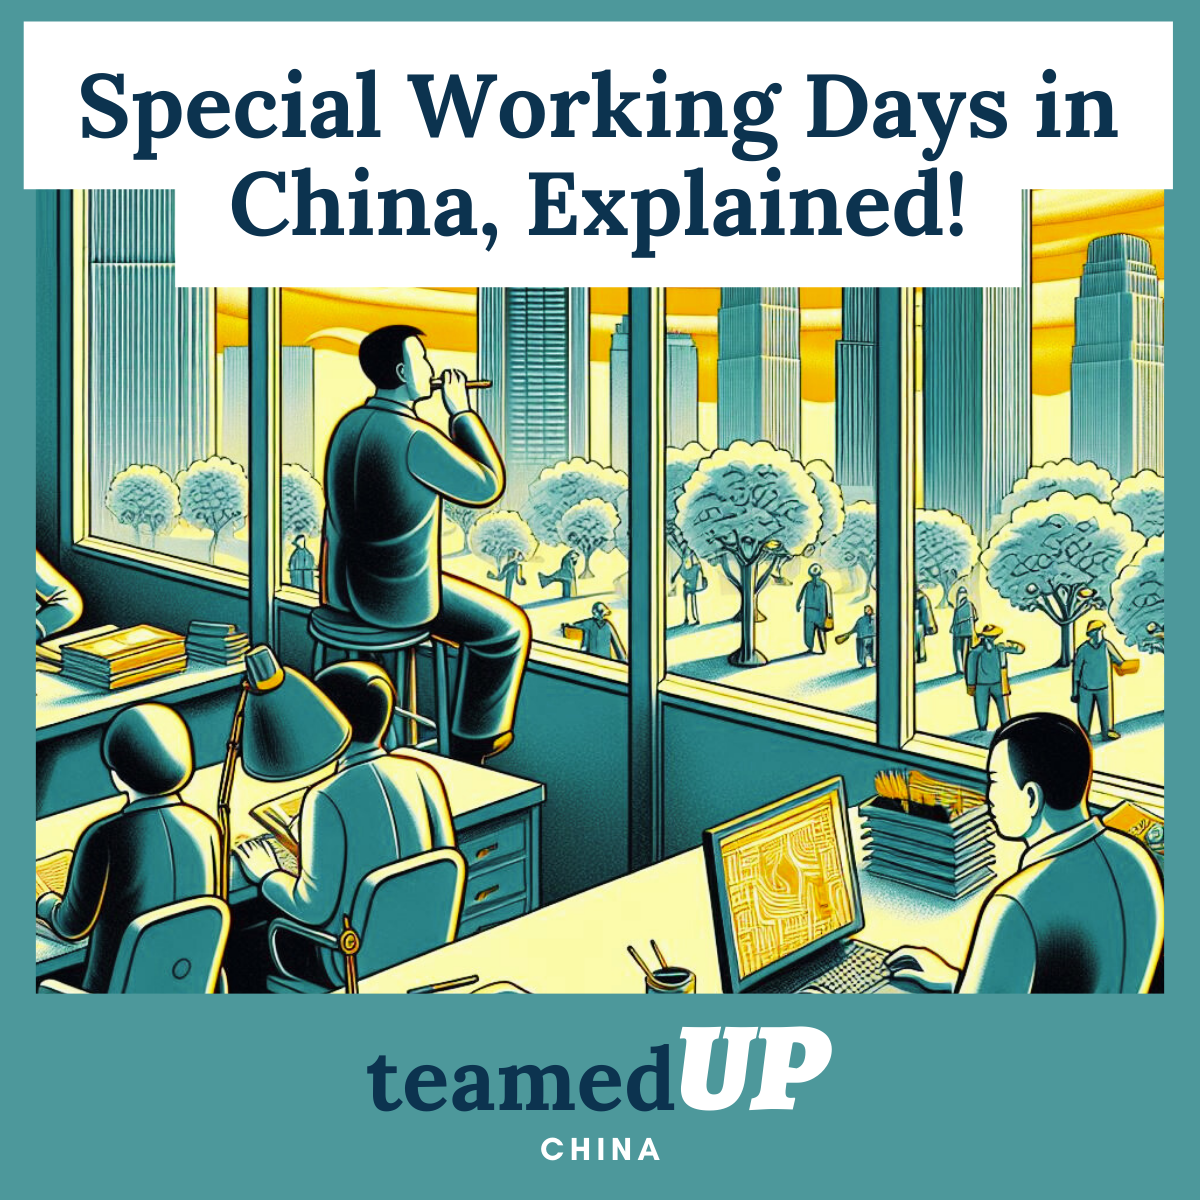 Special Working Days in China